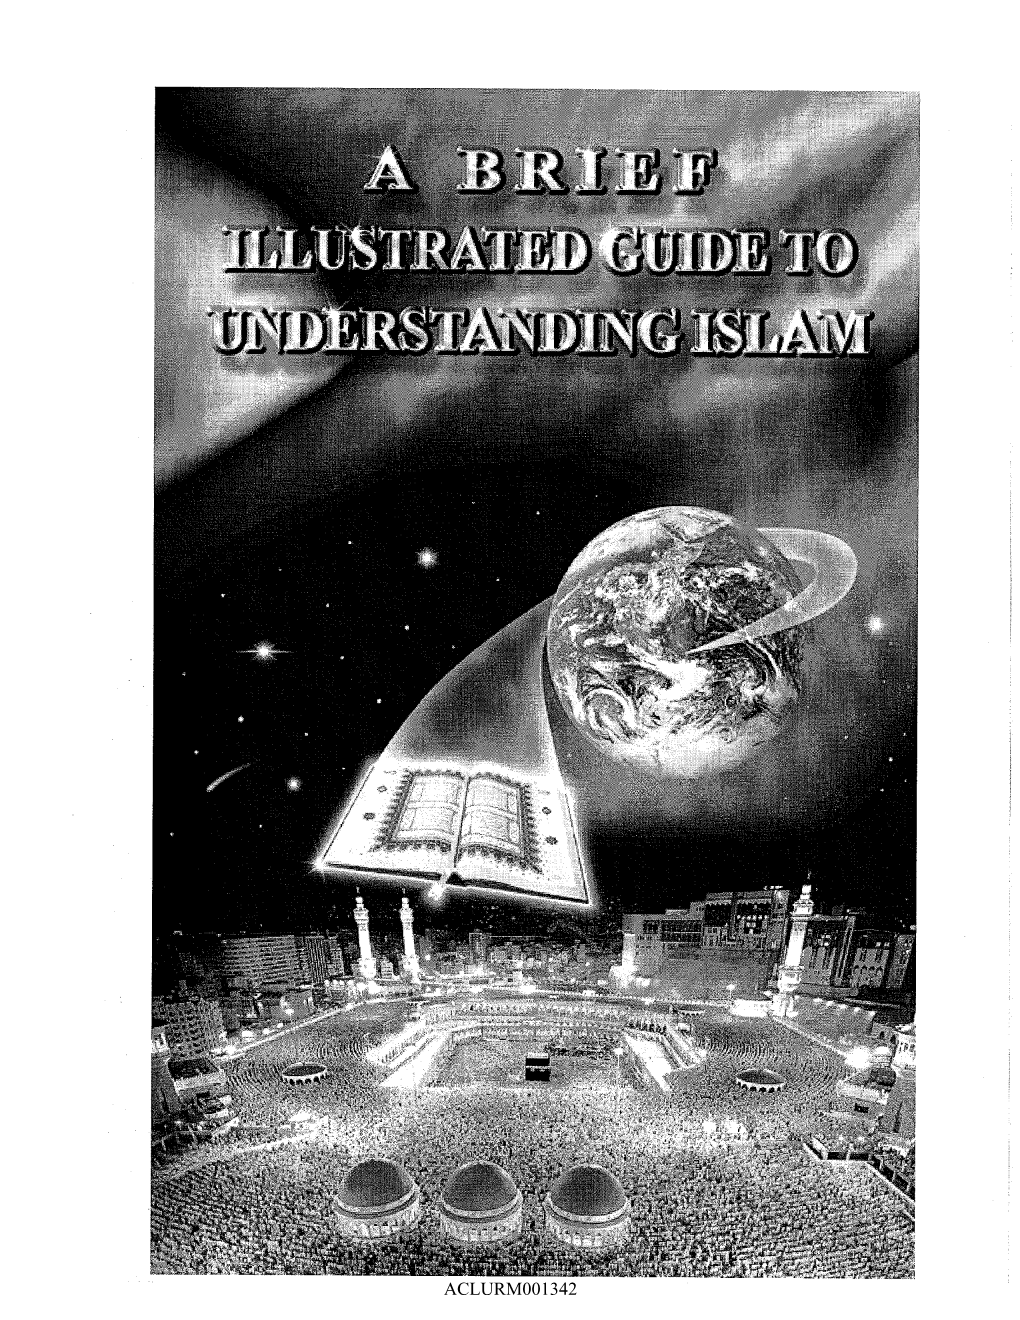 ACLURM001342 for This Entire Book Online, for More Information on Islam, Or for a Printed Copy, Visit